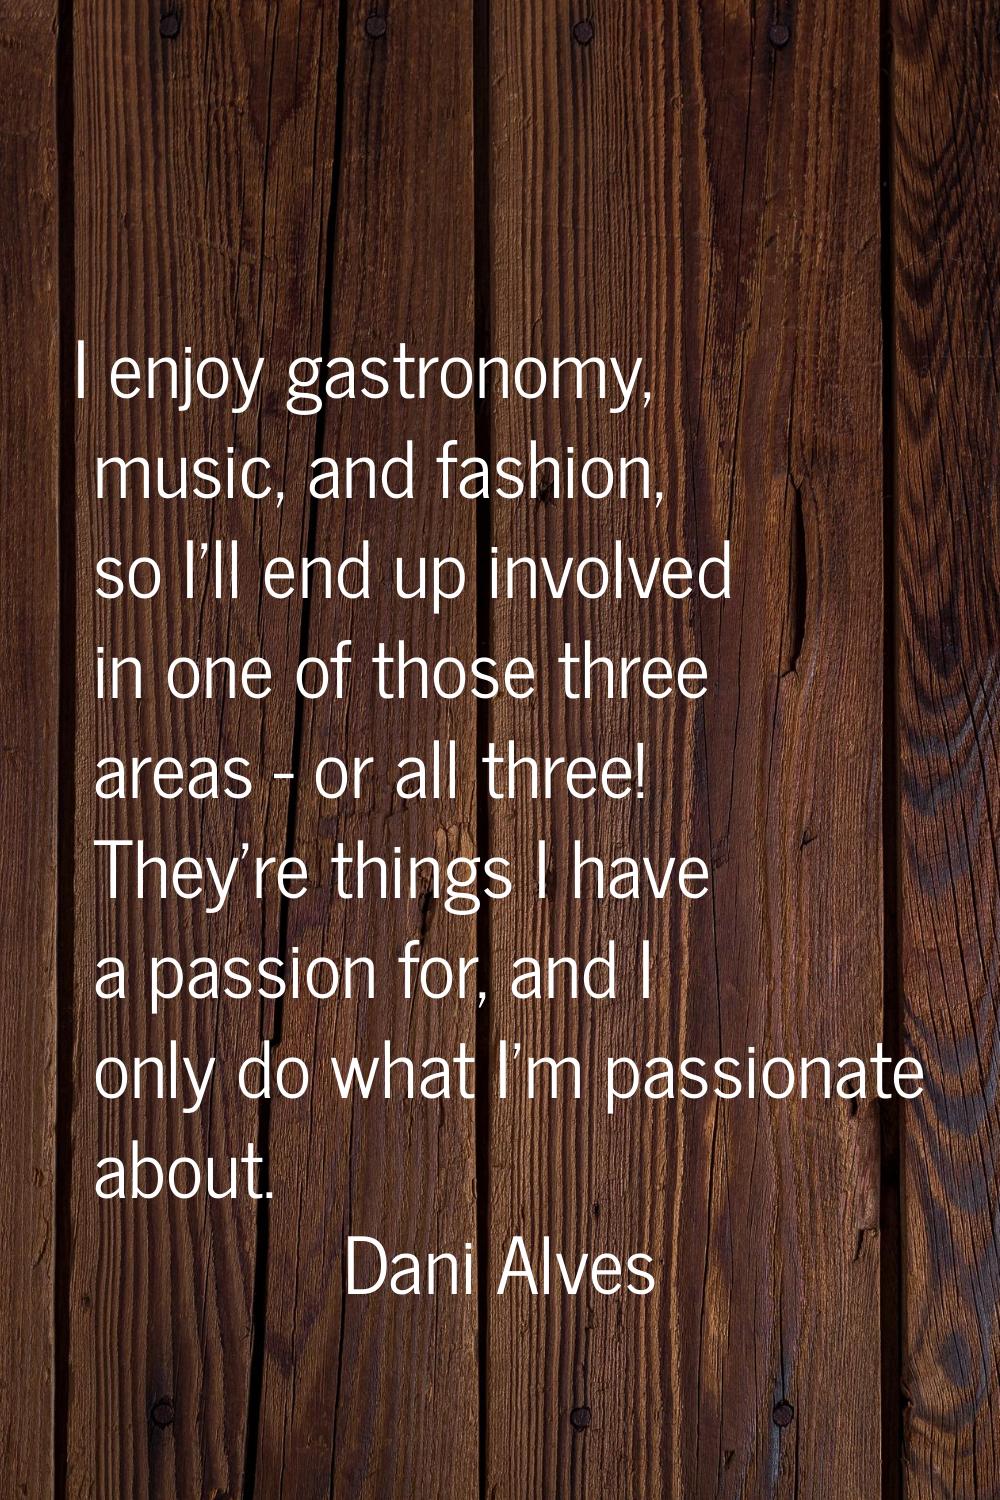 I enjoy gastronomy, music, and fashion, so I'll end up involved in one of those three areas - or al